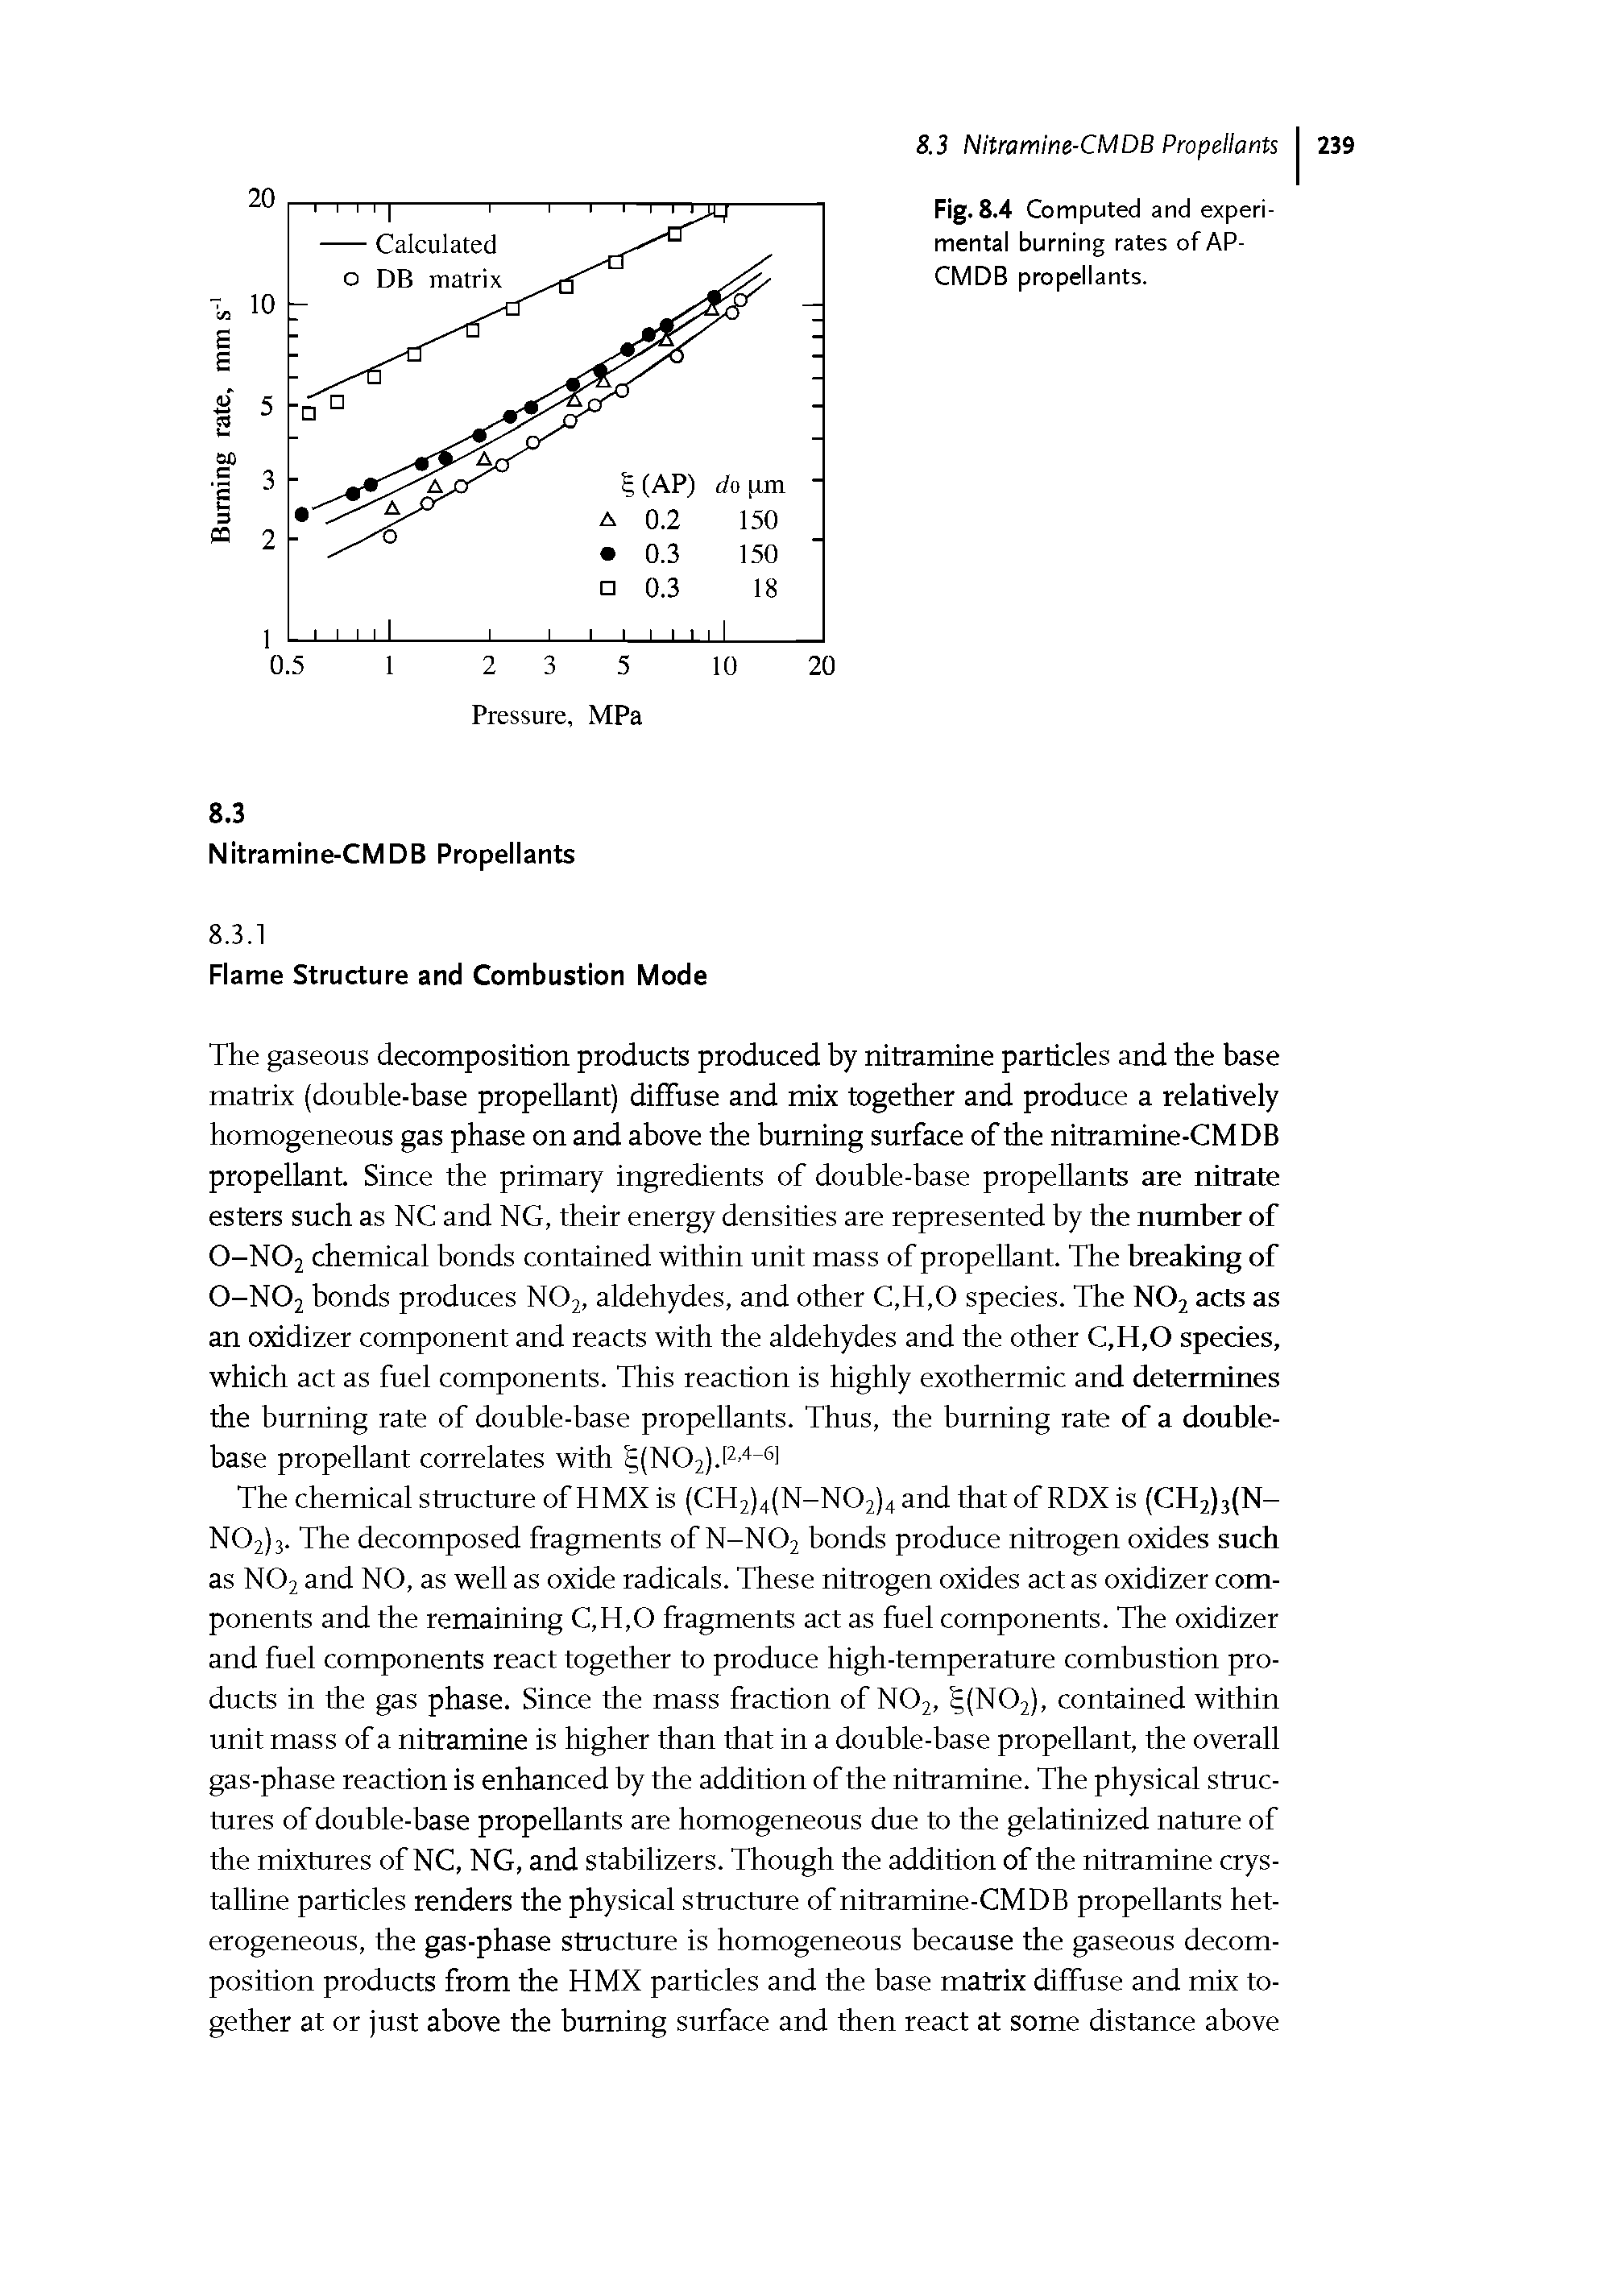 Fig. 8.4 Computed and experimental burning rates of AP-CMDB propellants.